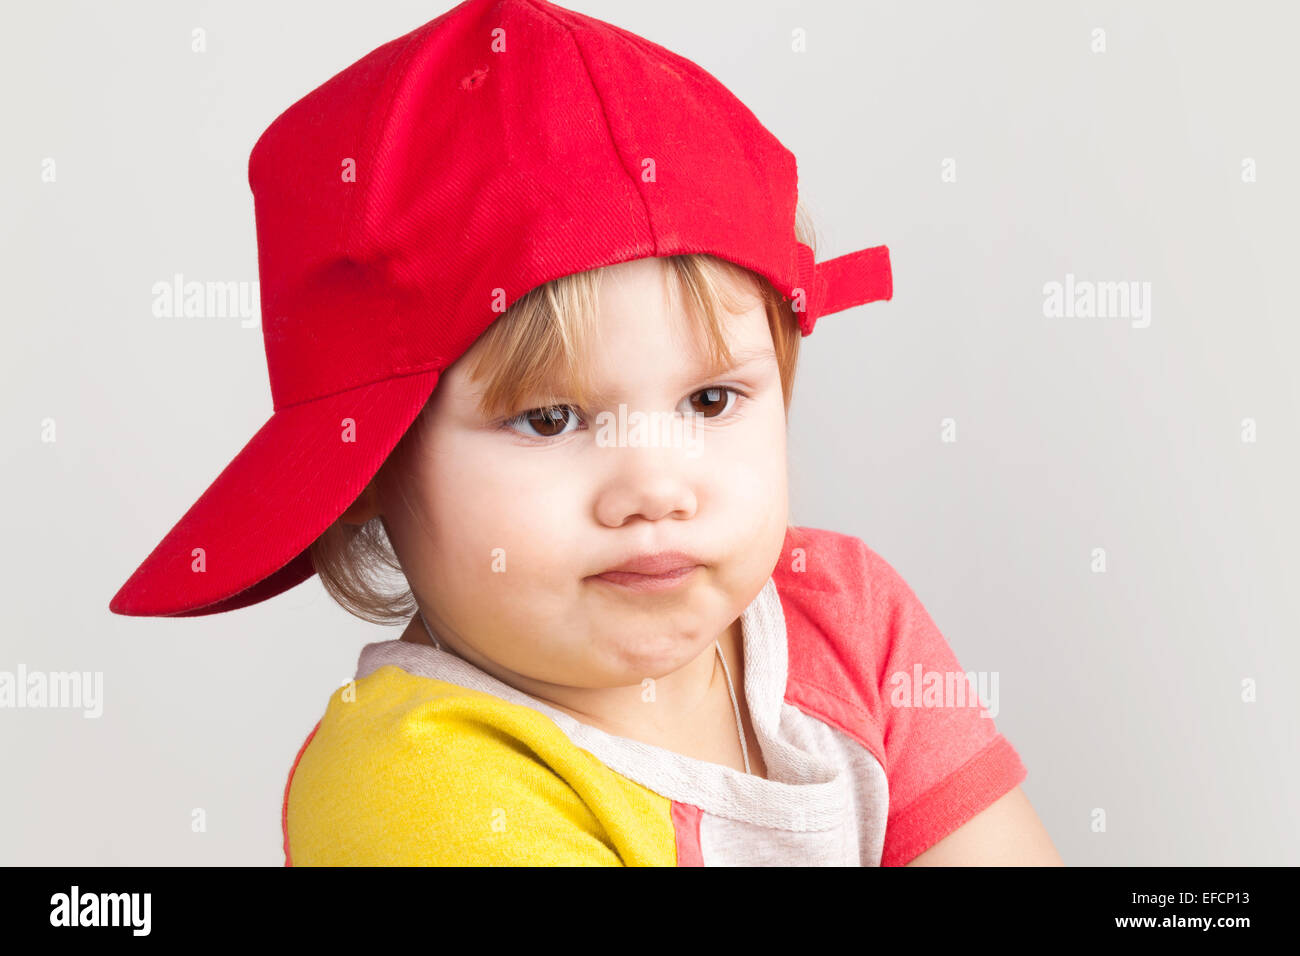 Studio portrait of funny confused baby girl in red baseball cap over gray wall background Stock Photo